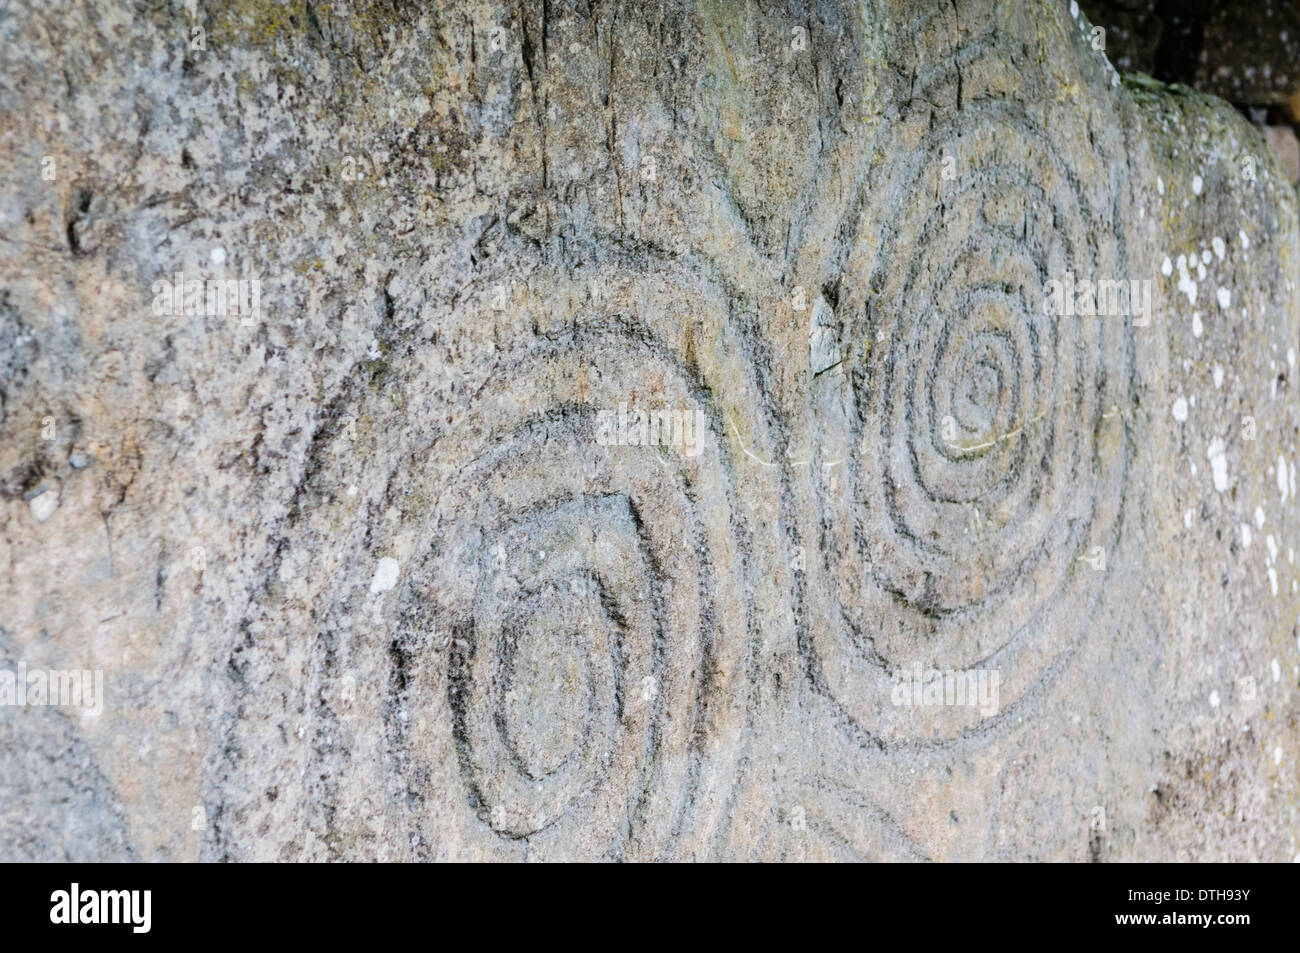 Spiral carvings on one of the kerb stones at Newgrange chambered passage tomb Stock Photo